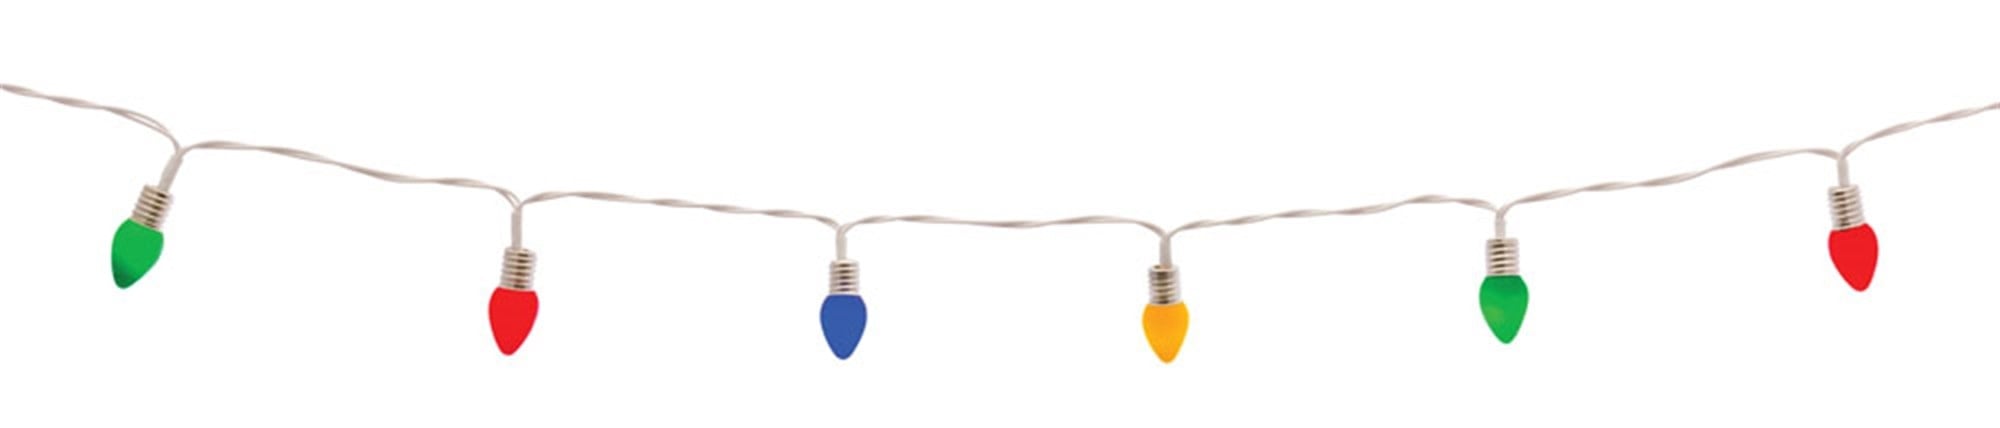 6.5' Battery Operated Bulb Multicolor String Lights